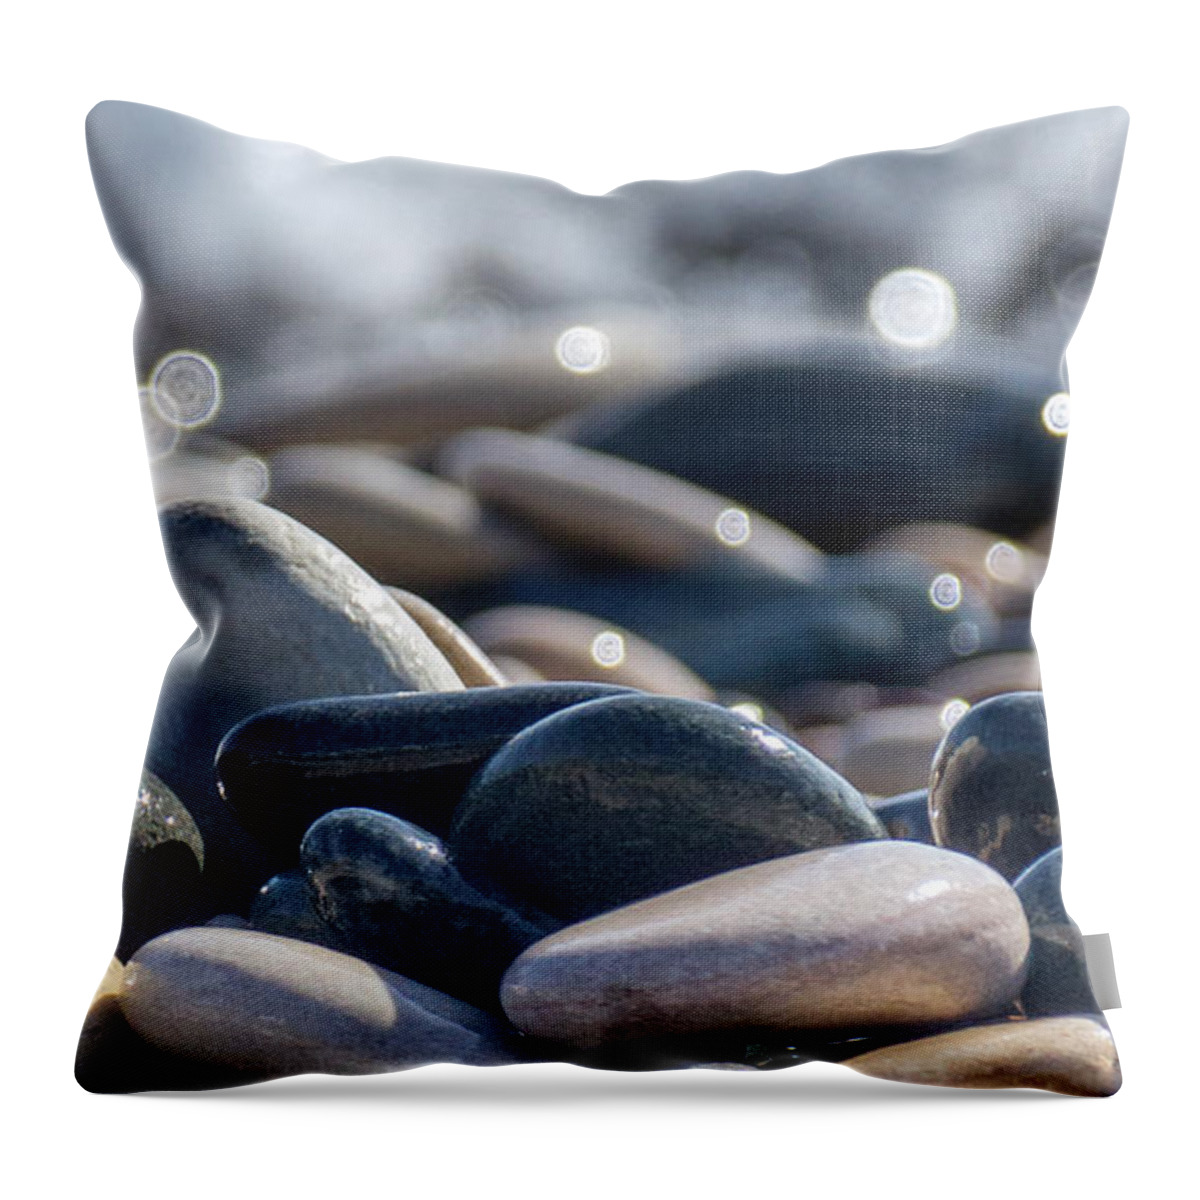 Abstract Throw Pillow featuring the photograph Sea Stones by Stelios Kleanthous